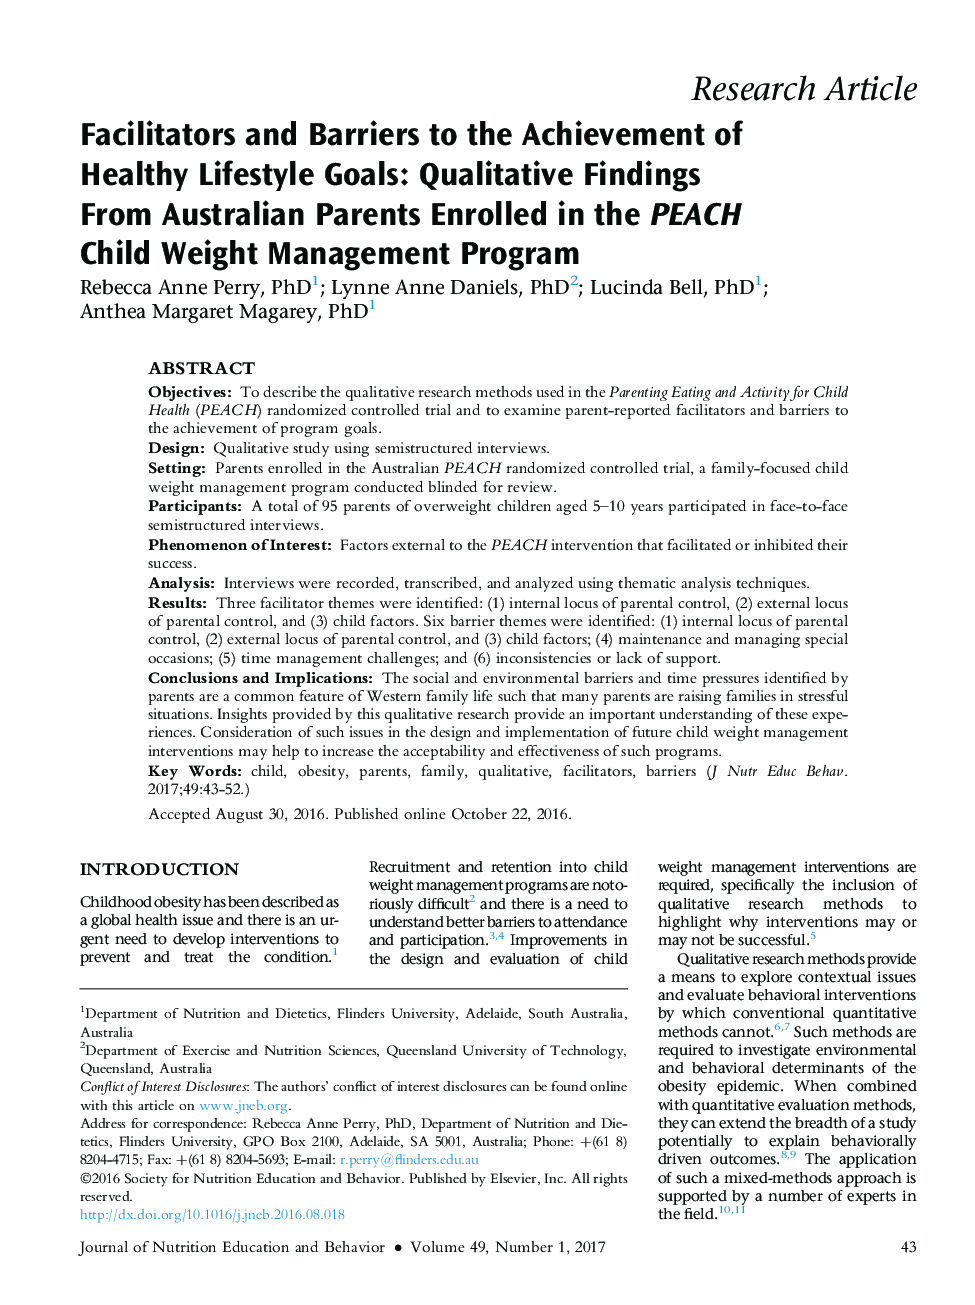 Facilitators and Barriers to the Achievement of Healthy Lifestyle Goals: Qualitative Findings FromÂ Australian Parents Enrolled in the PEACH Child Weight Management Program